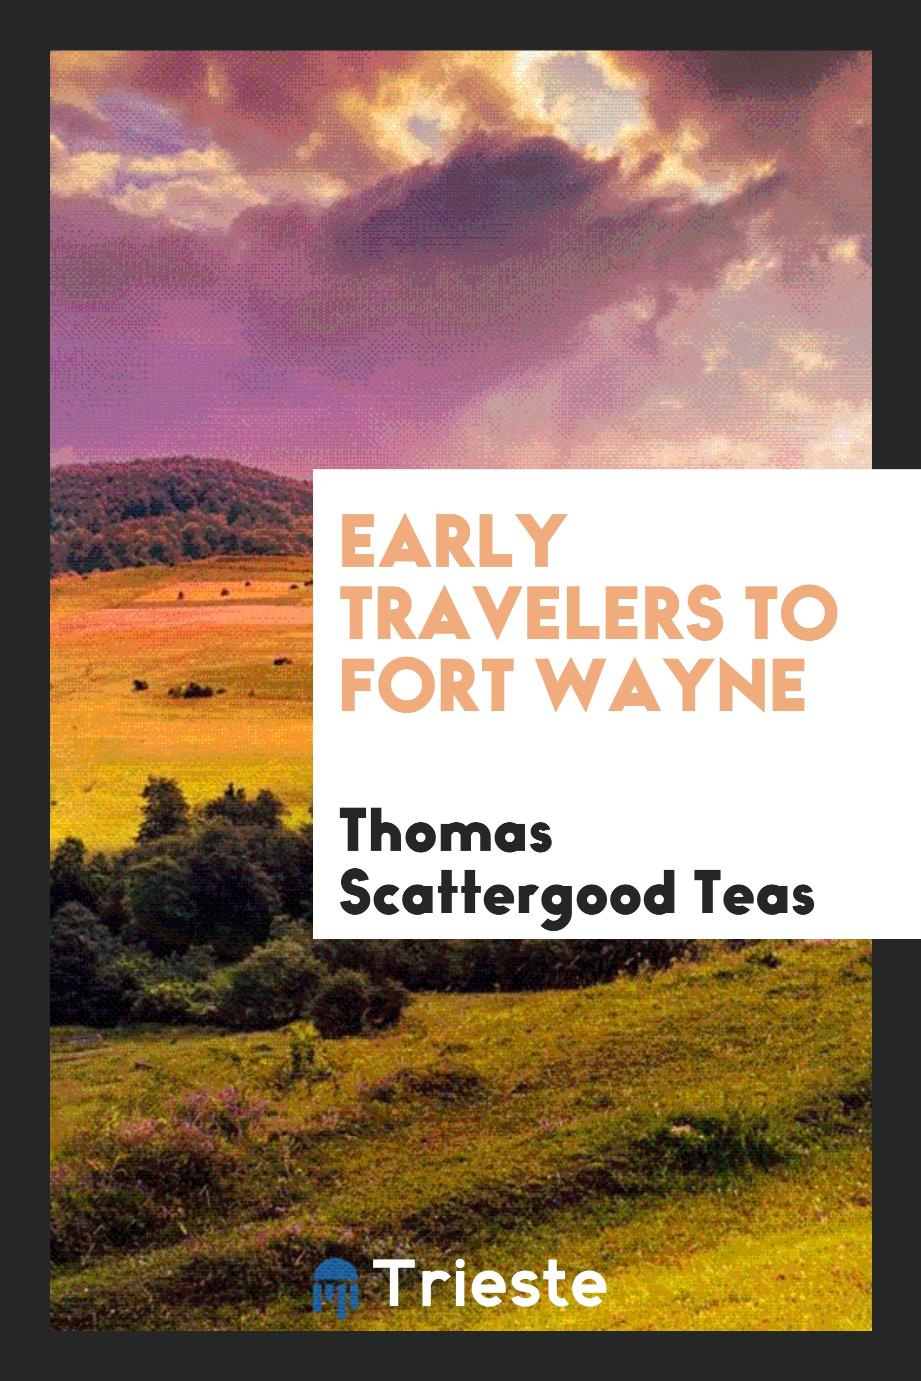 Early travelers to Fort Wayne